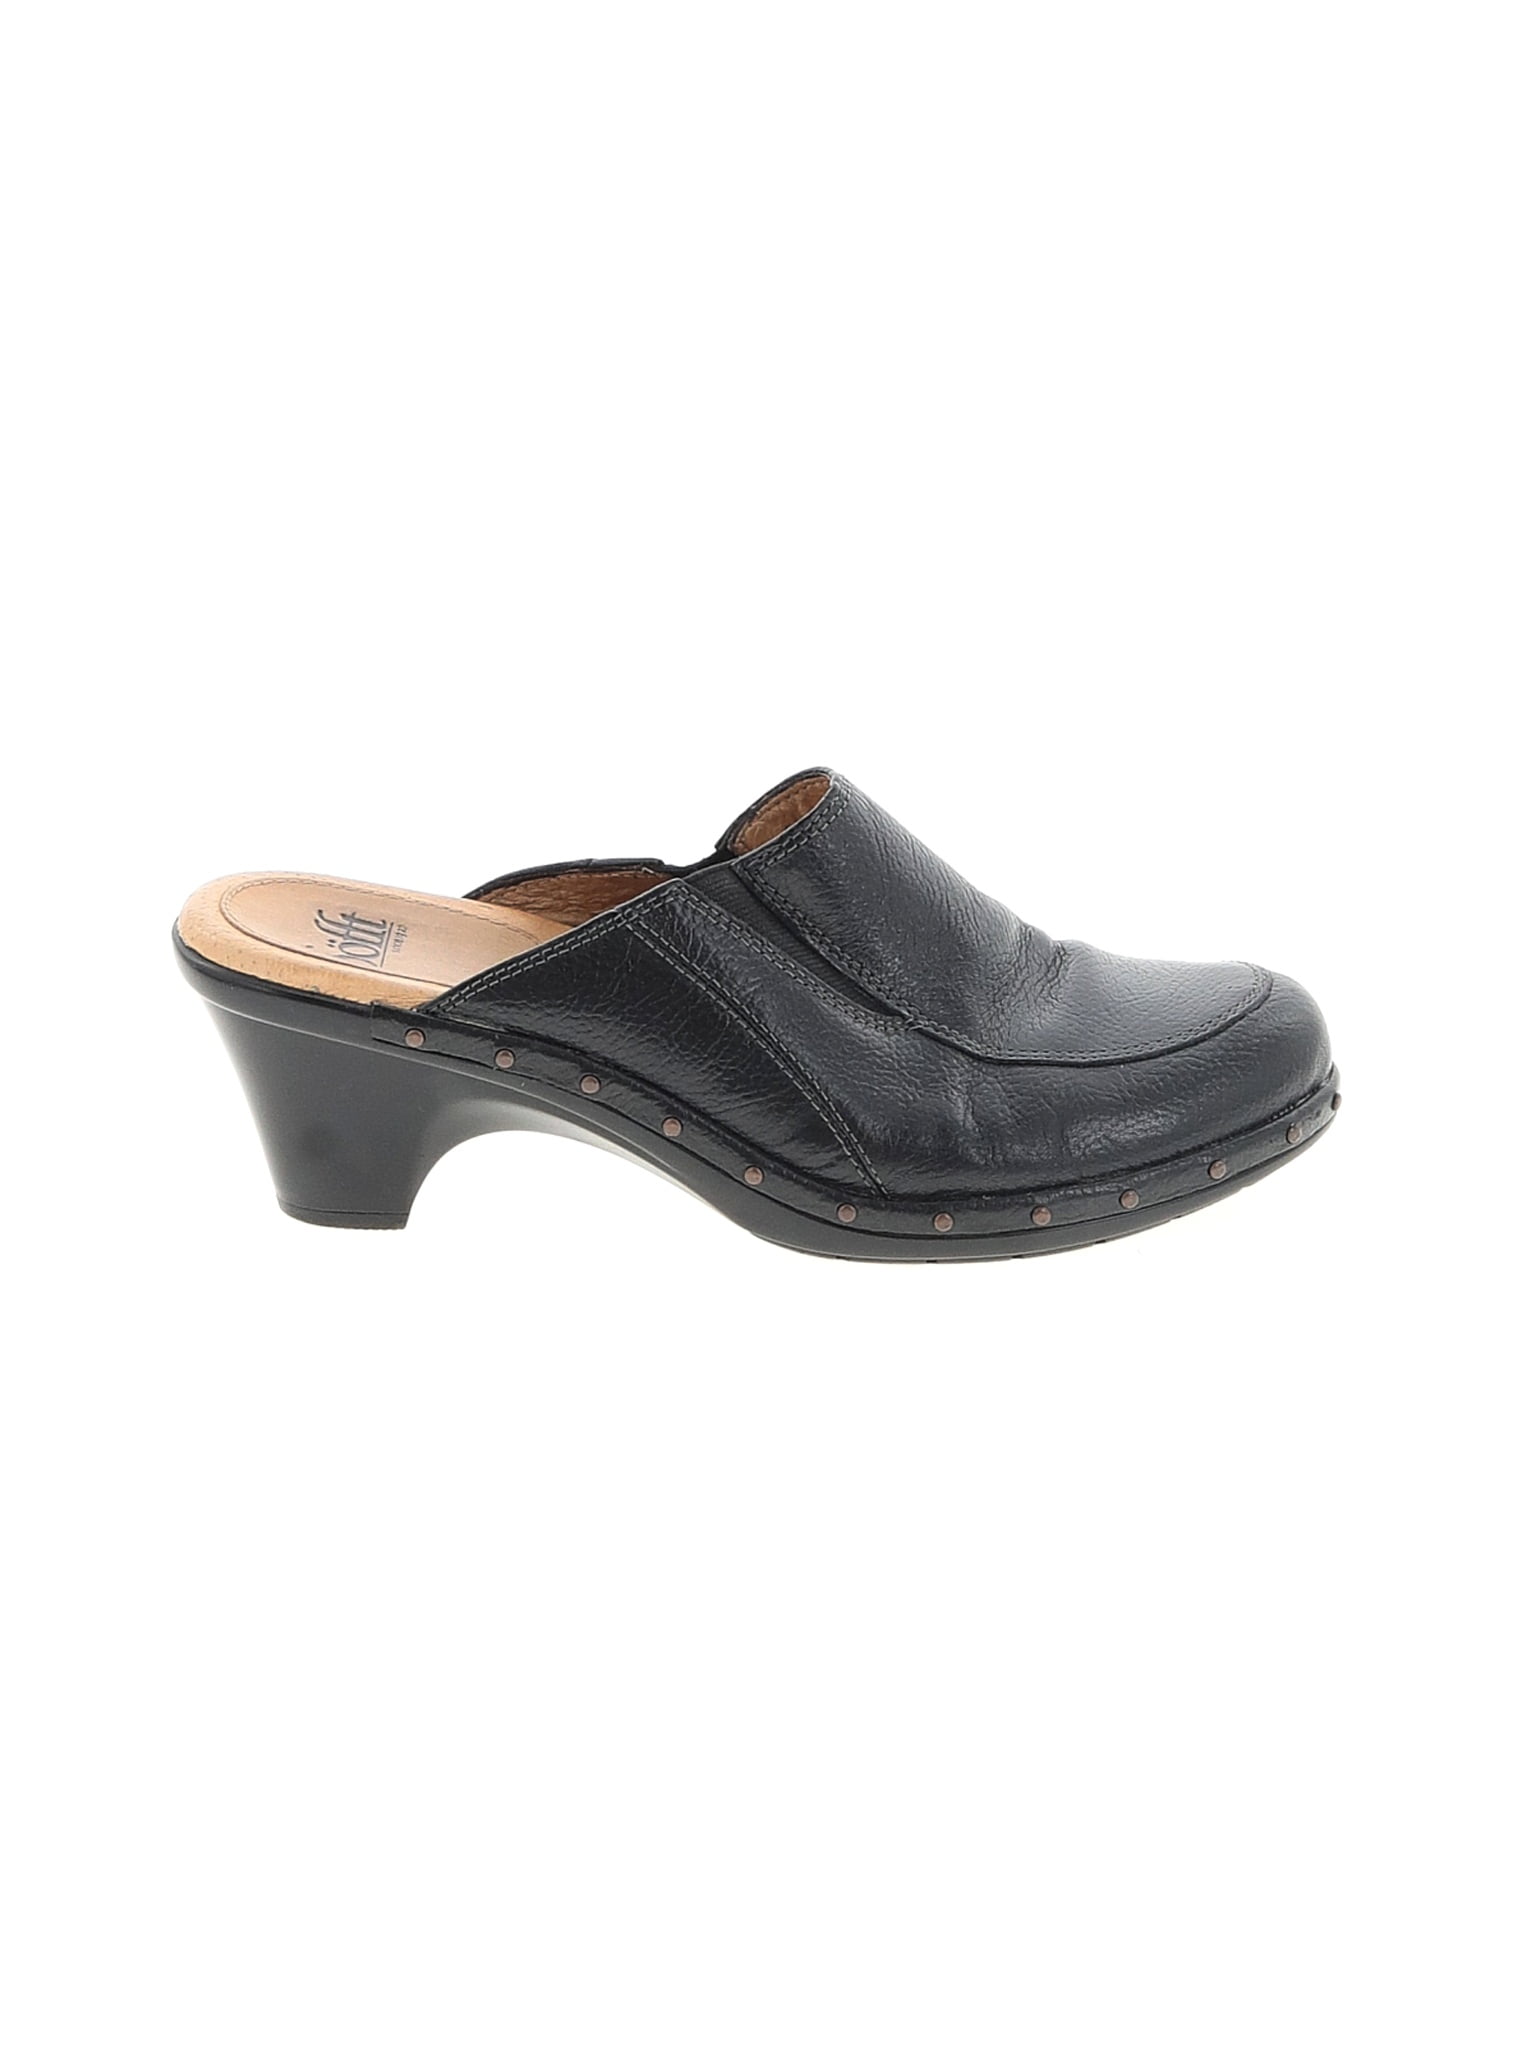 sofft clogs mules